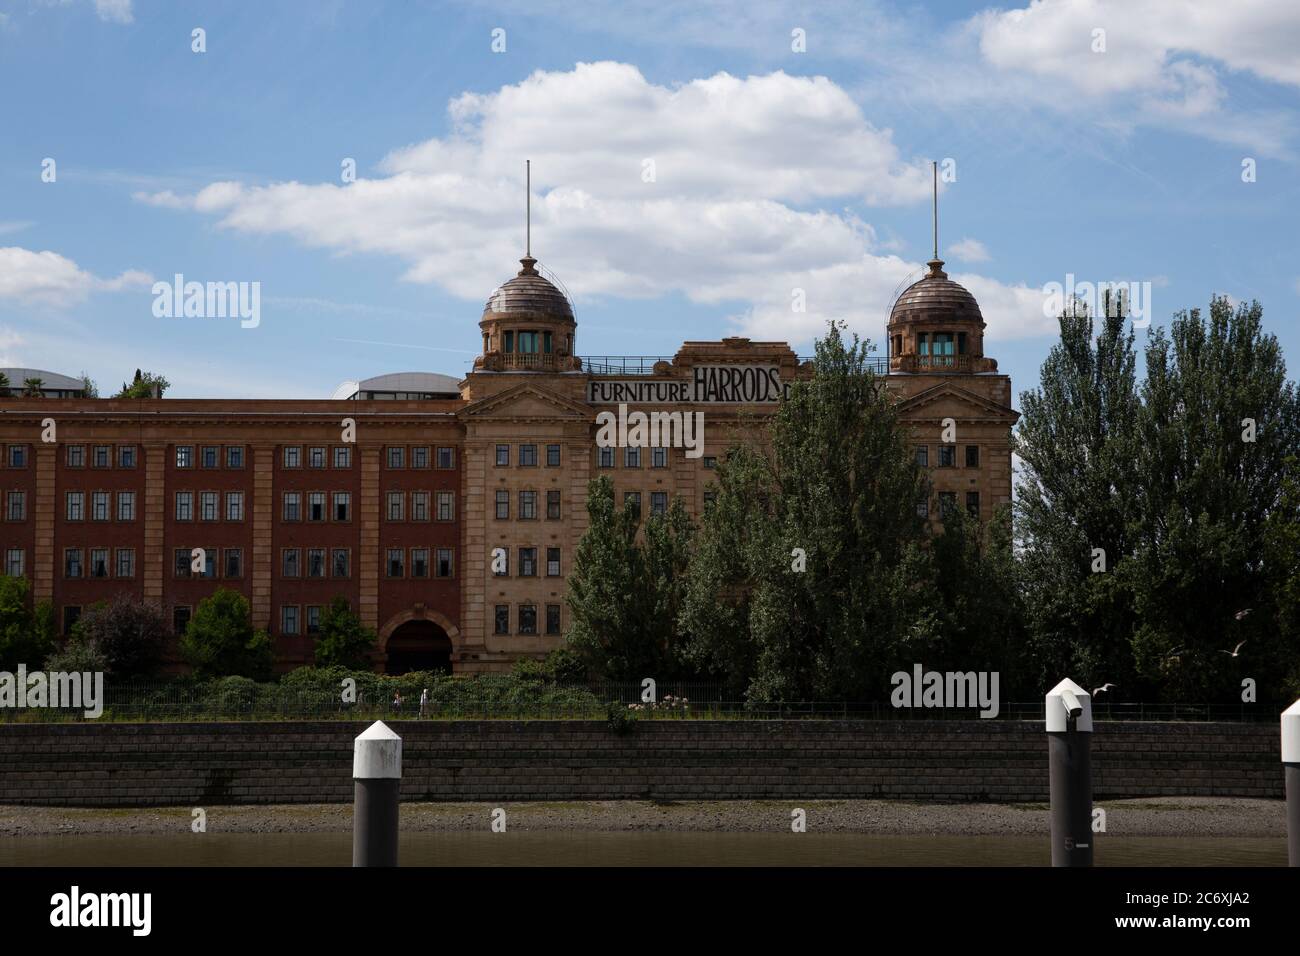 The Harrods Furniture Depository buildings on the south bank of the River Thames near Hammersmith Bridge in Barnes, London SW13 Stock Photo